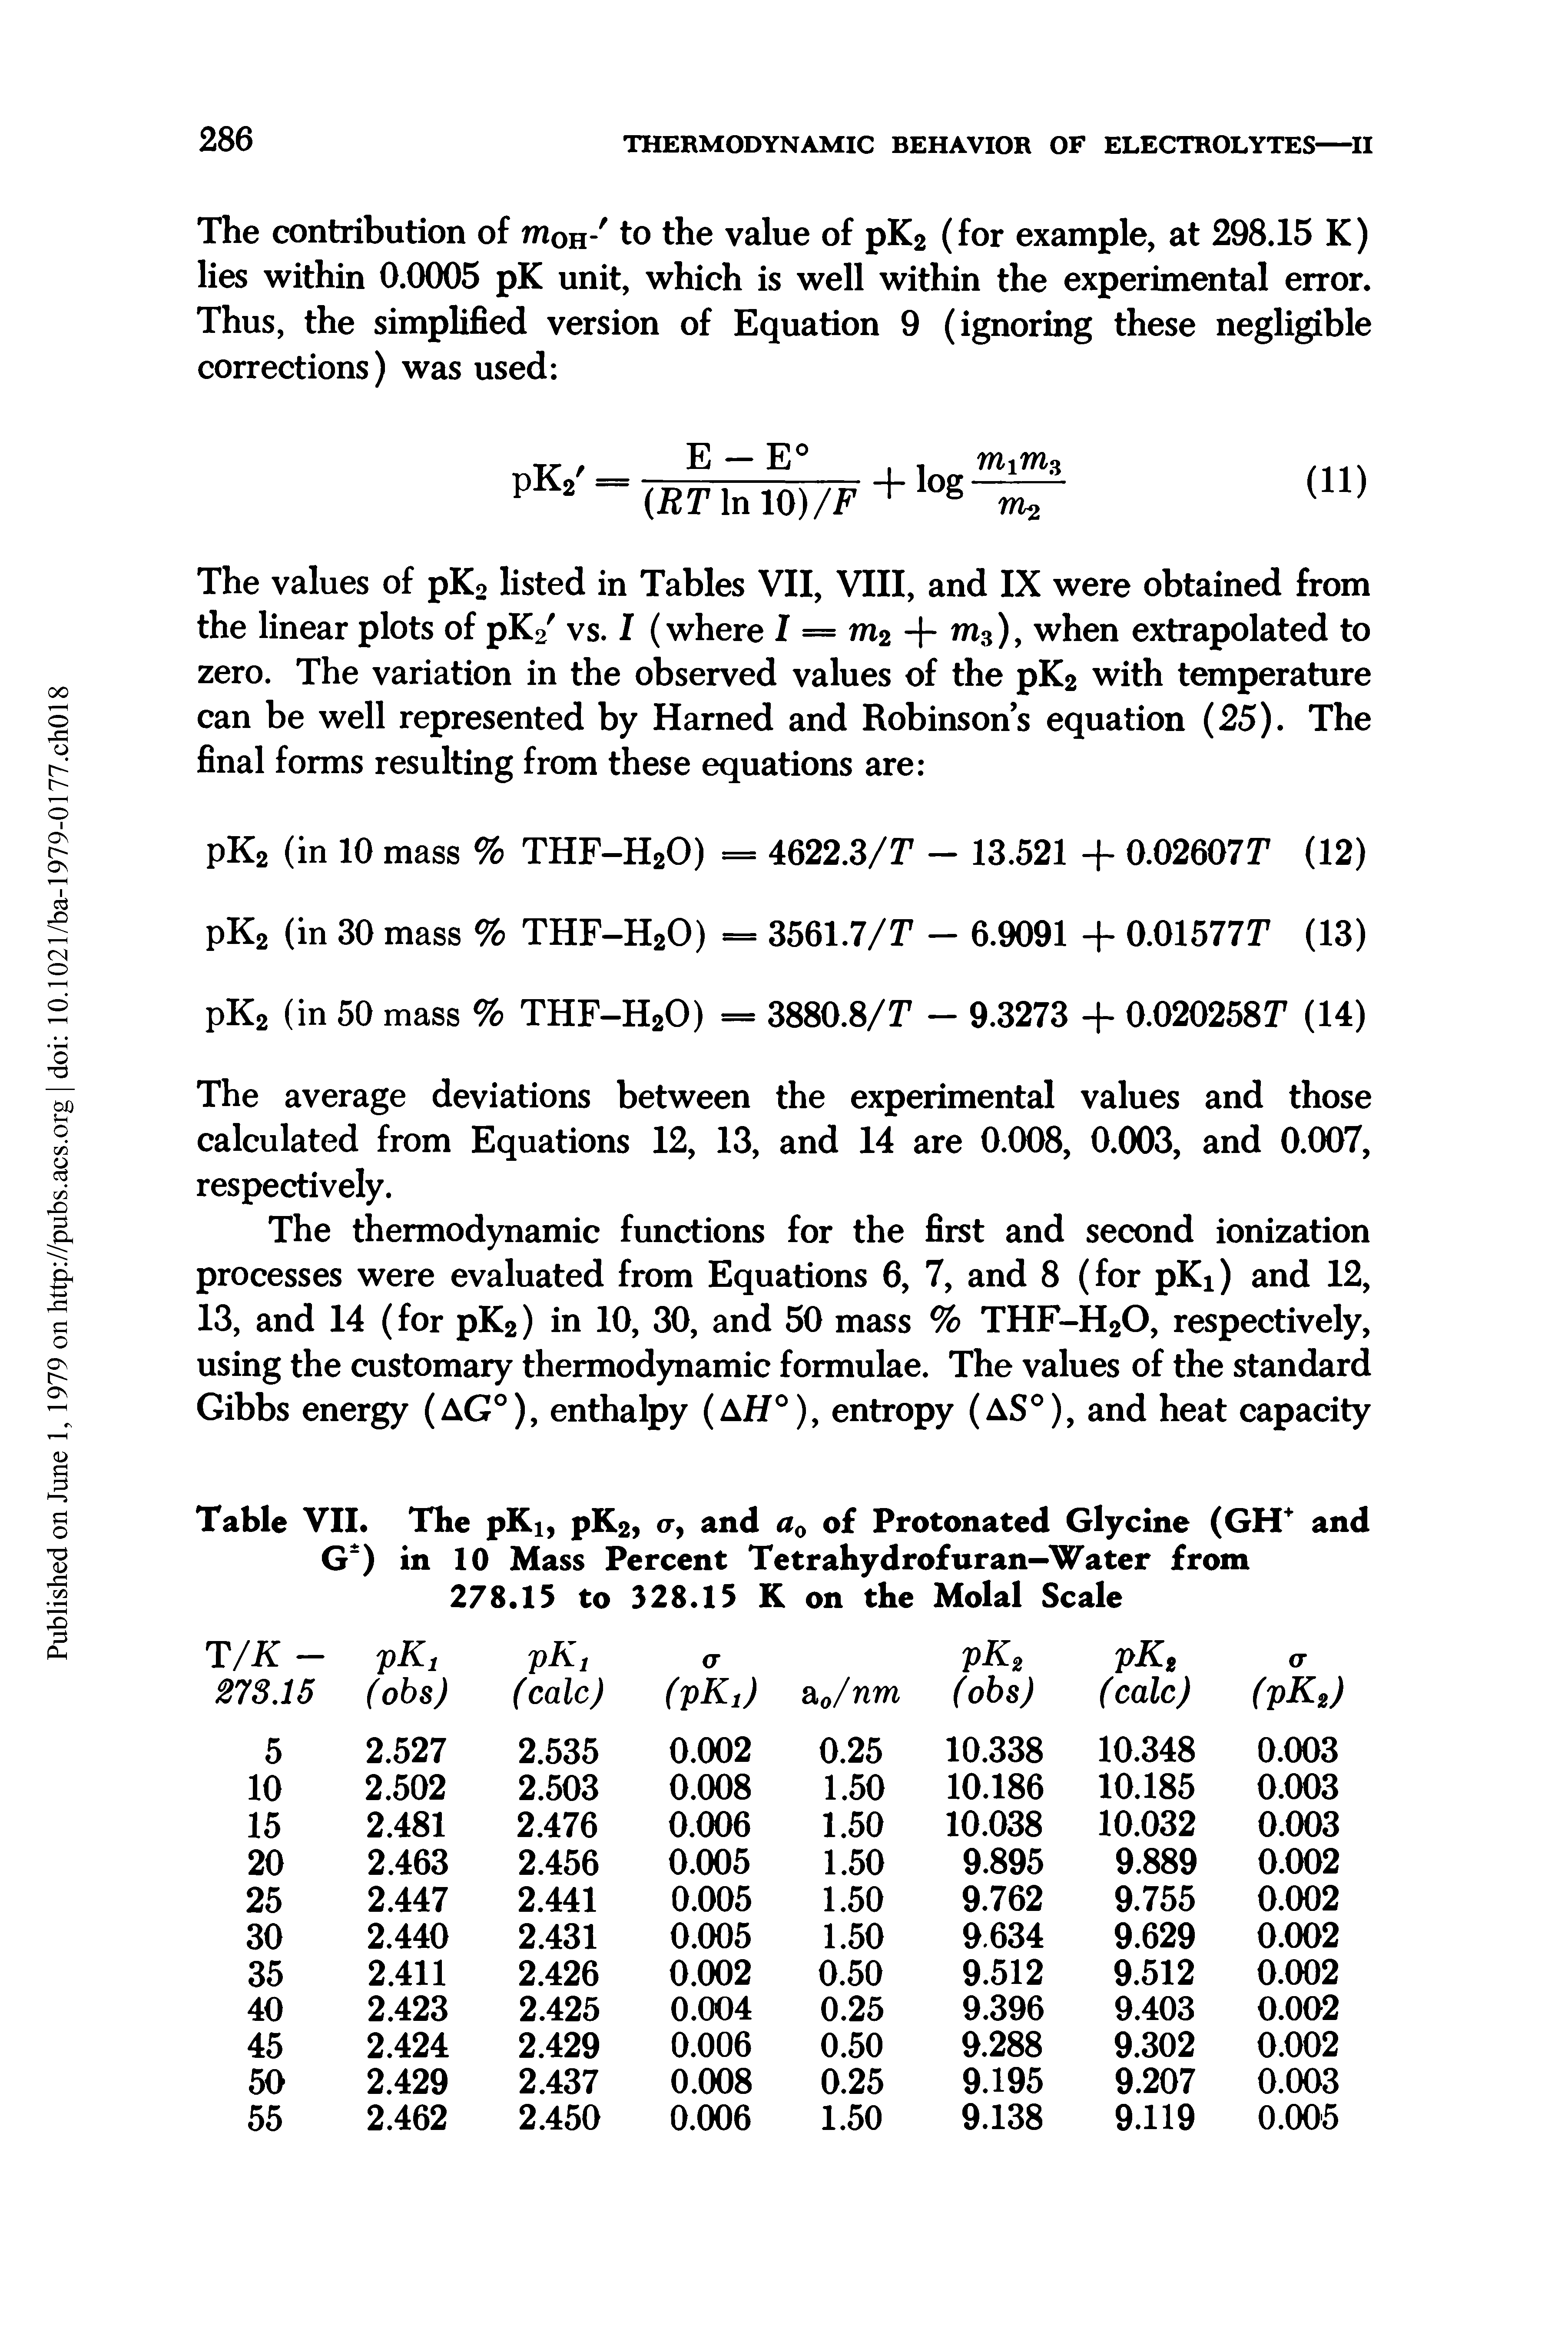 Table VII. The pKi, pK2, cr, and a0 of Protonated Glycine (GIT and G ) in 10 Mass Percent Tetrahydrofuran-Water from 278.15 to 328.15 K on the Molal Scale...